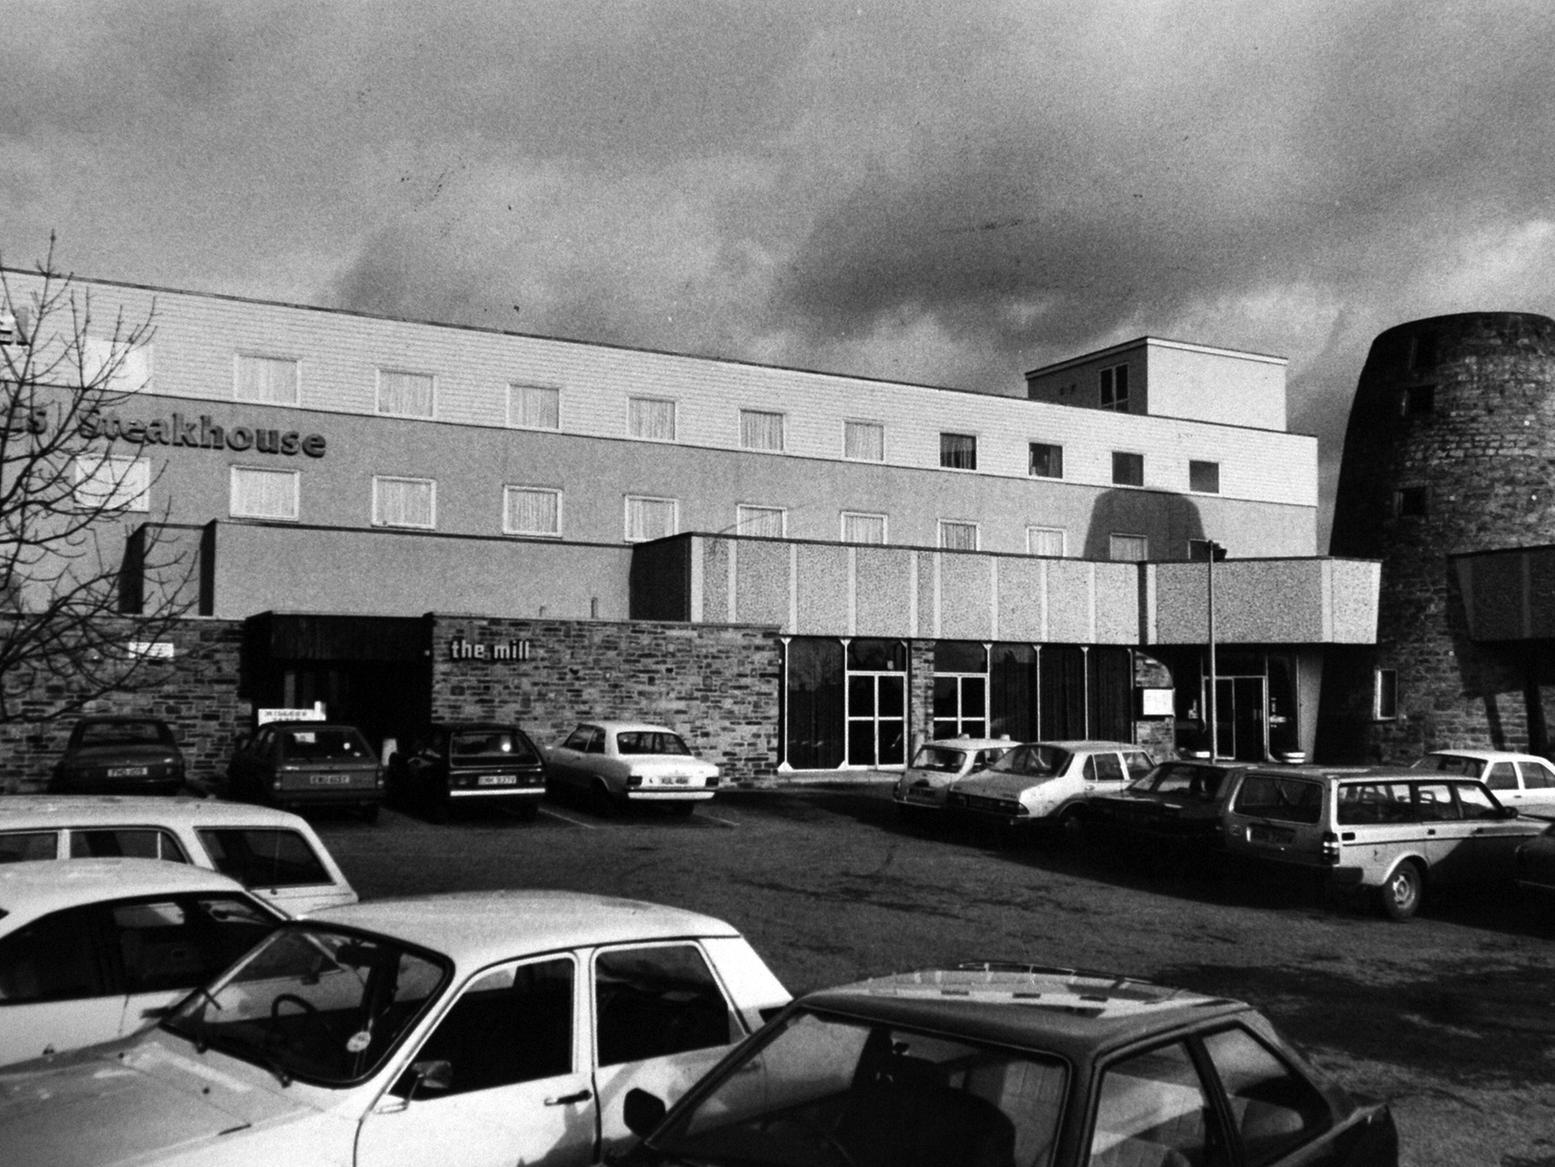 Recognise this east Leeds landmark? It's The Windmill Hotel at Seacroft.